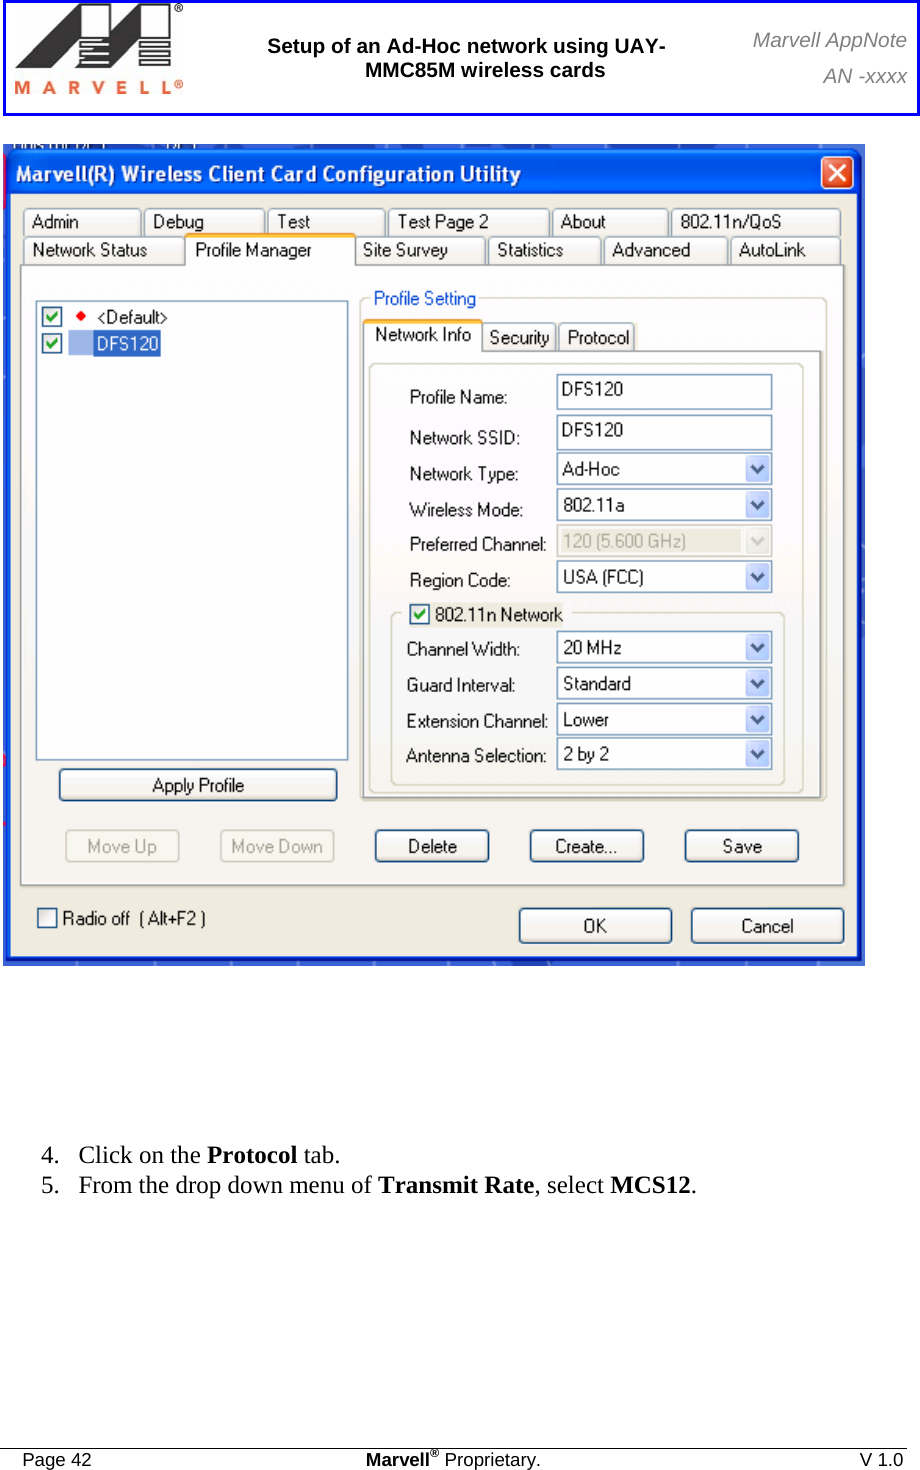  Setup of an Ad-Hoc network using UAY-MMC85M wireless cards Marvell AppNoteAN -xxxx  Page 42  Marvell® Proprietary.  V 1.0        4. Click on the Protocol tab. 5. From the drop down menu of Transmit Rate, select MCS12.     